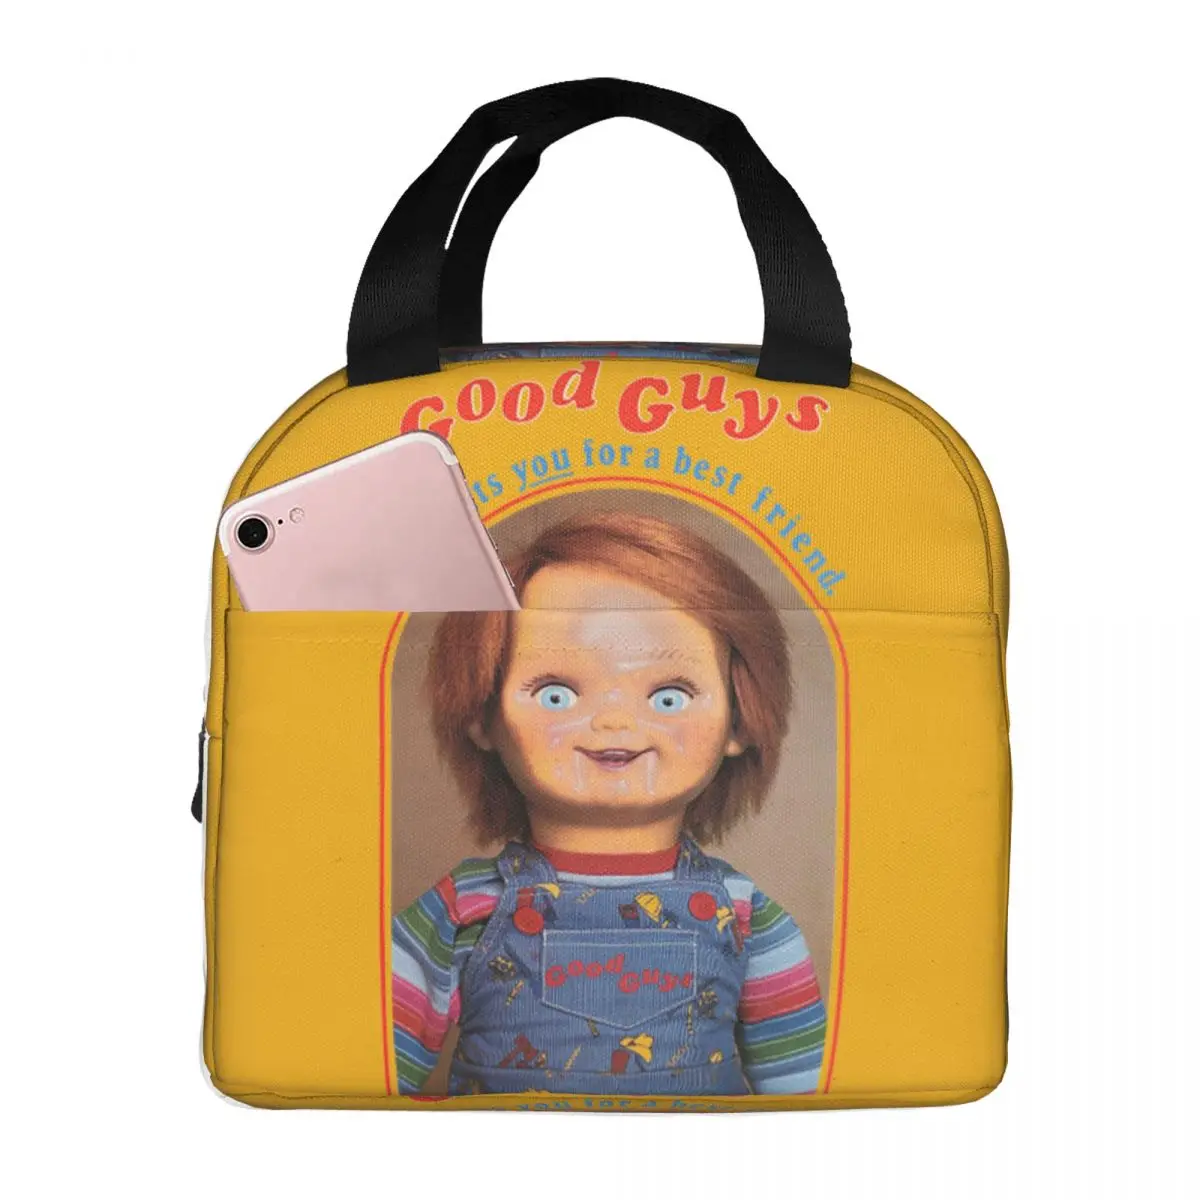 He Wants You For A Best Friend Chucky Lunch Bags Portable Insulated Cooler Child's Play Thermal Picnic Work Lunch Box for Kids